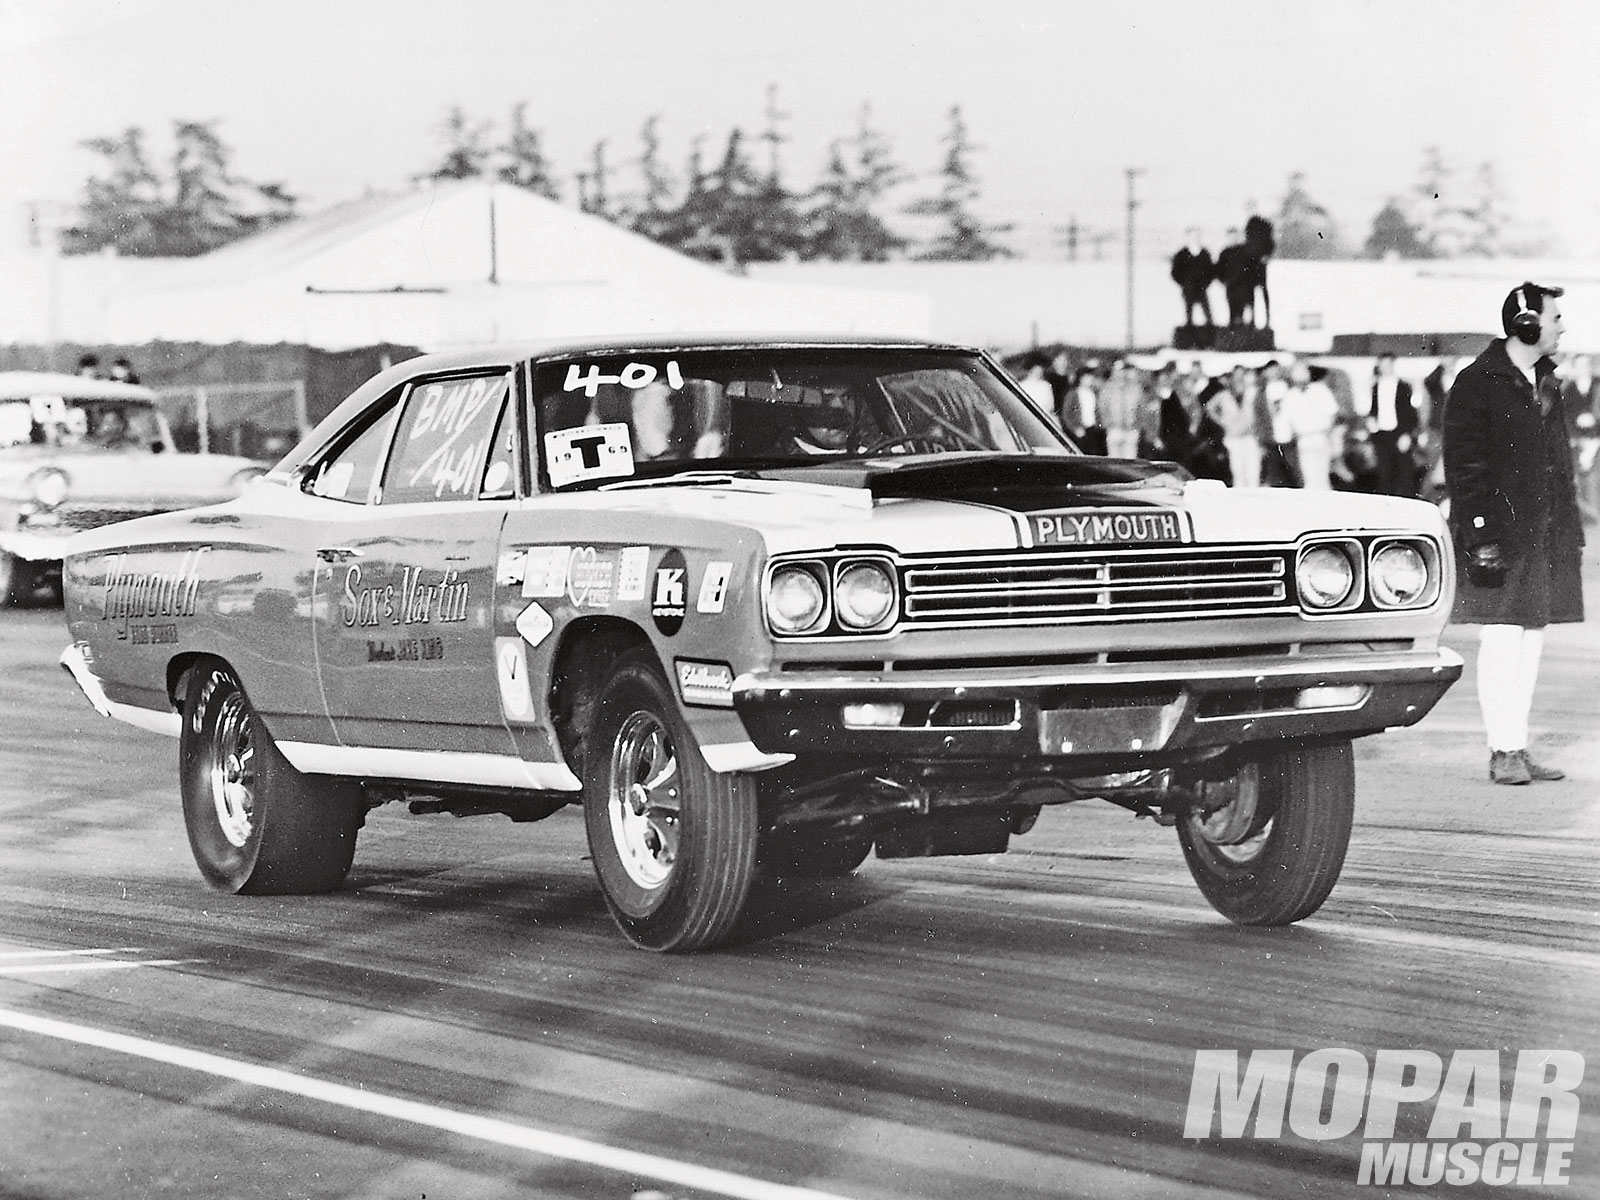 1969, Sox, And, Martin, Plymouth, Road, Runner, Drag, Racing, Race, Muscle, Hot, Rod, Rods Wallpaper